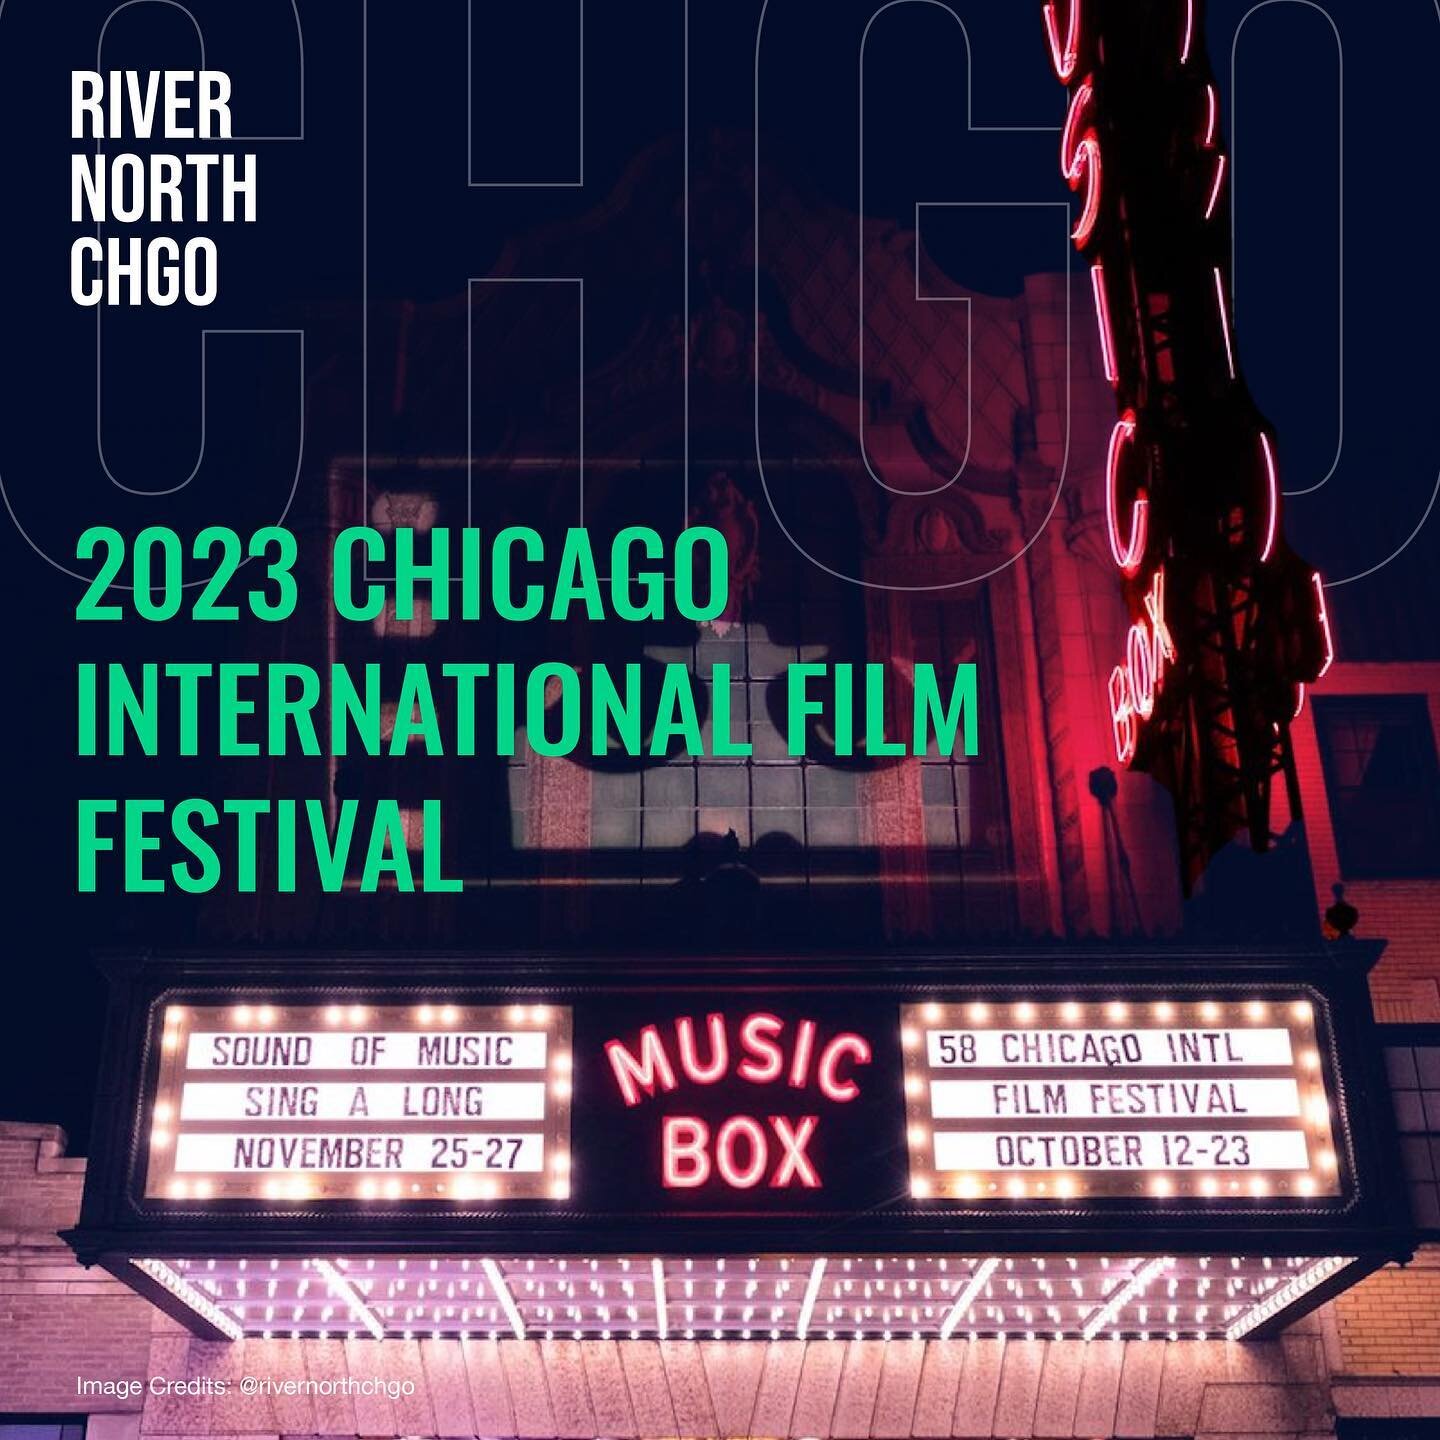 🎥 The 59th Chicago International Film Festival ✨

The Chicago International Film Festival wrapped up its 59th edition on October 22nd, once again drawing crowds and buzz to Chicago. From its rich history to the highlights of this year&rsquo;s festiv